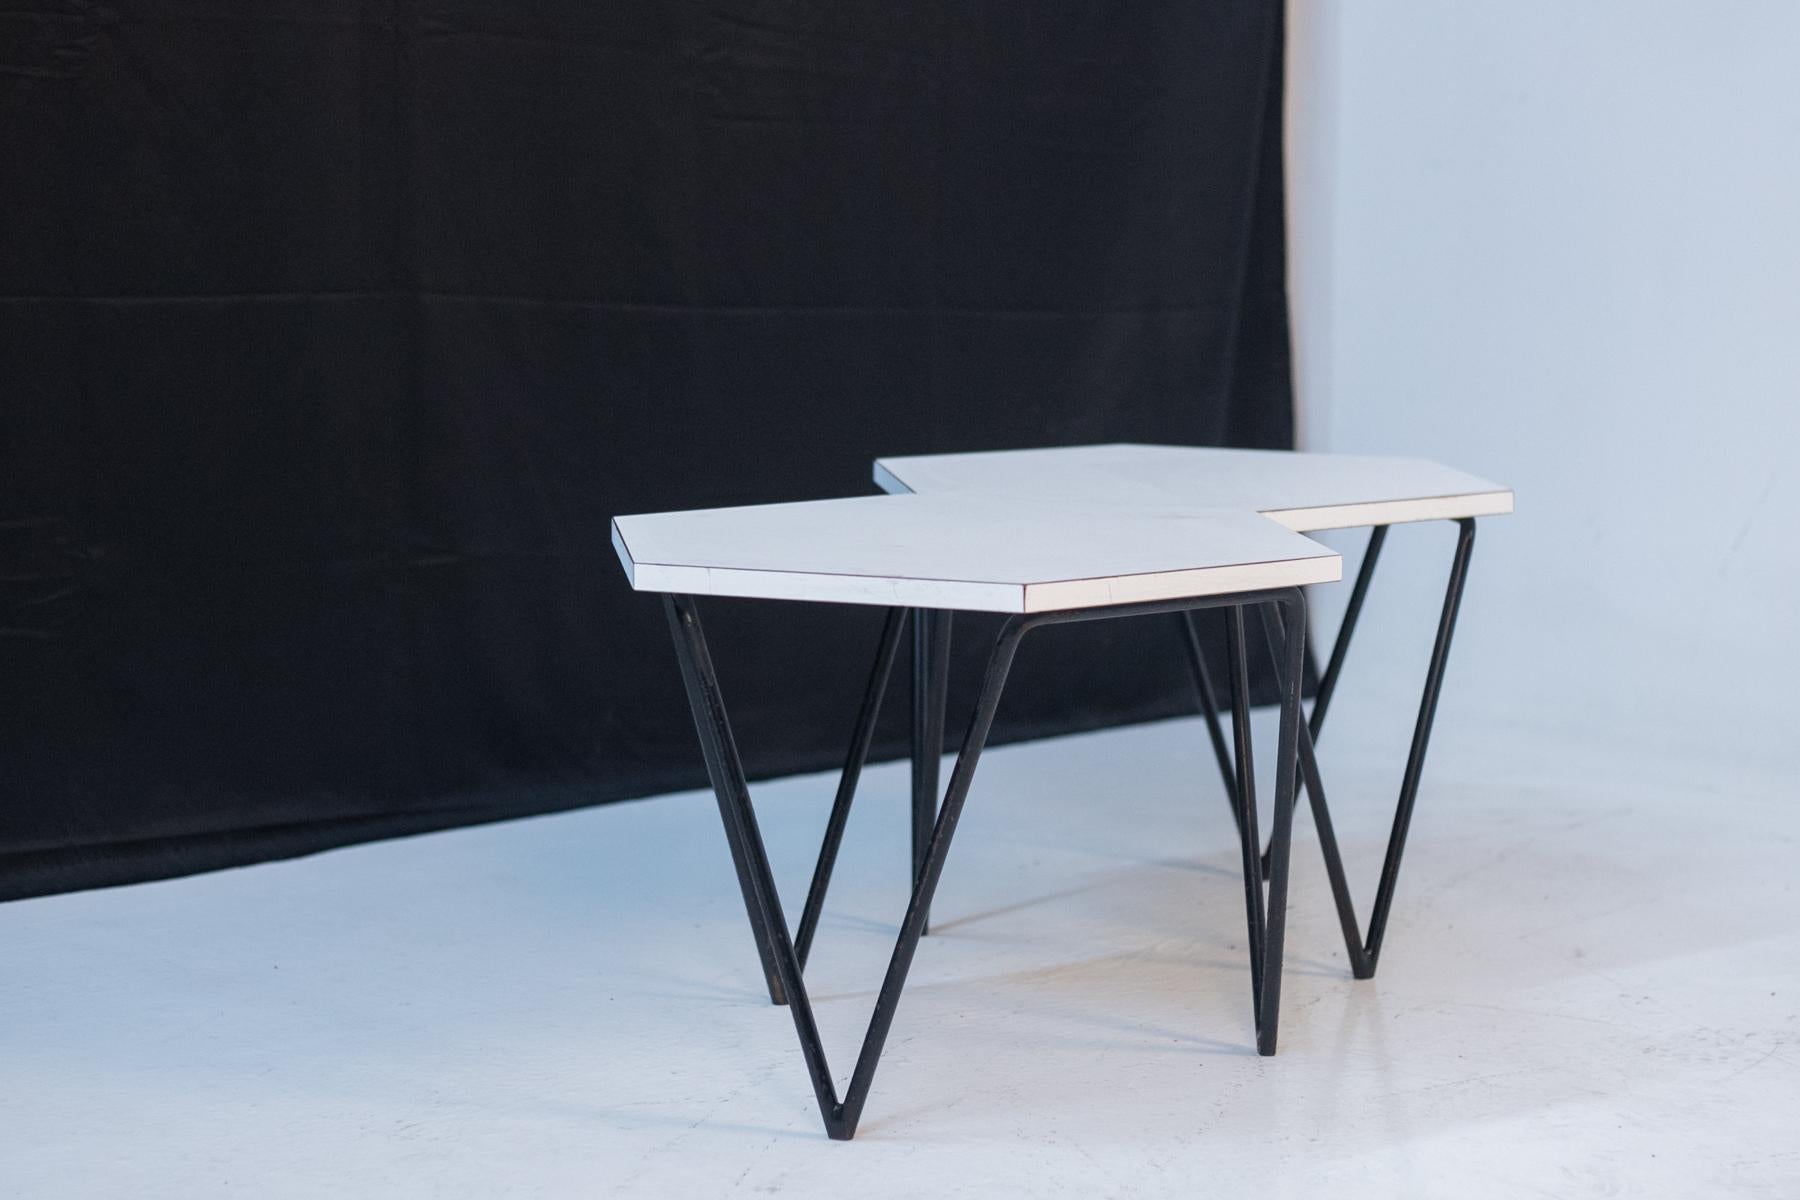 Pair of coffee table of the Isa Bergamo manufacture design Gio Ponti 50s. Hexagonal wooden shelf top with black painted iron feet. The coffee tables have a very elegant and resistant black iron-metal frame. The supporting legs are 3 and consist of